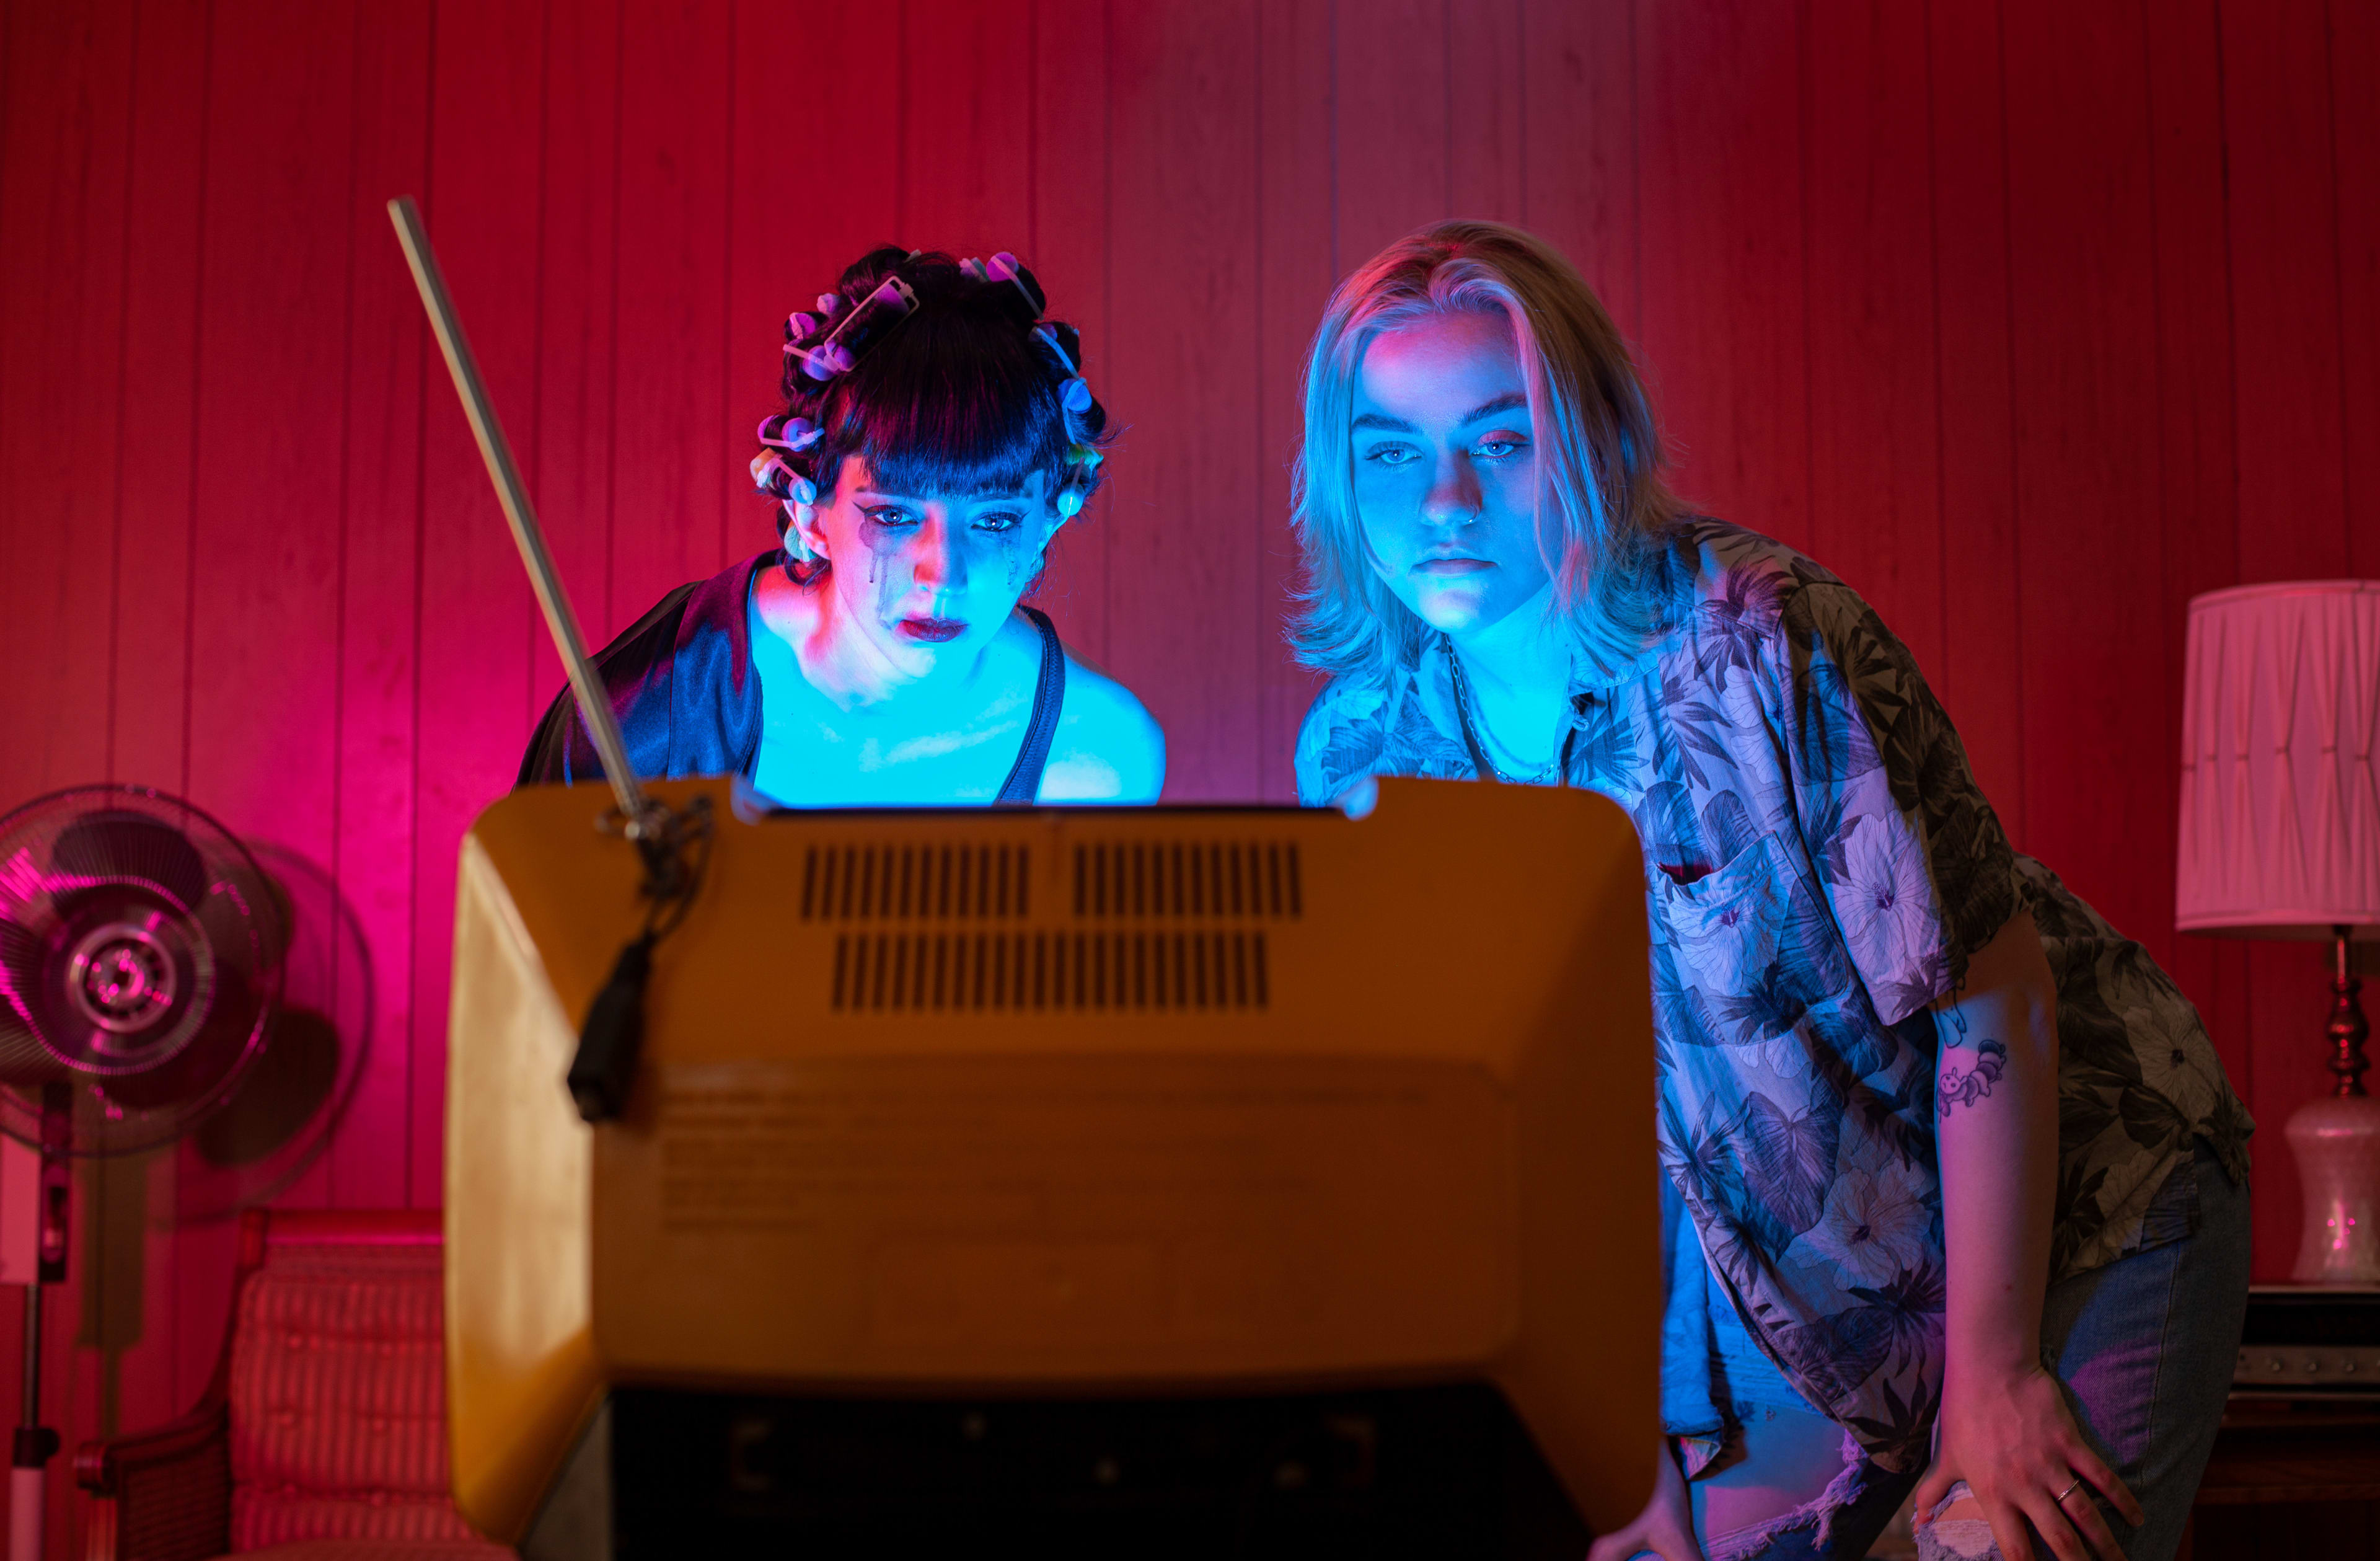 Two women posing in front of a TV during a retro photo shoot.